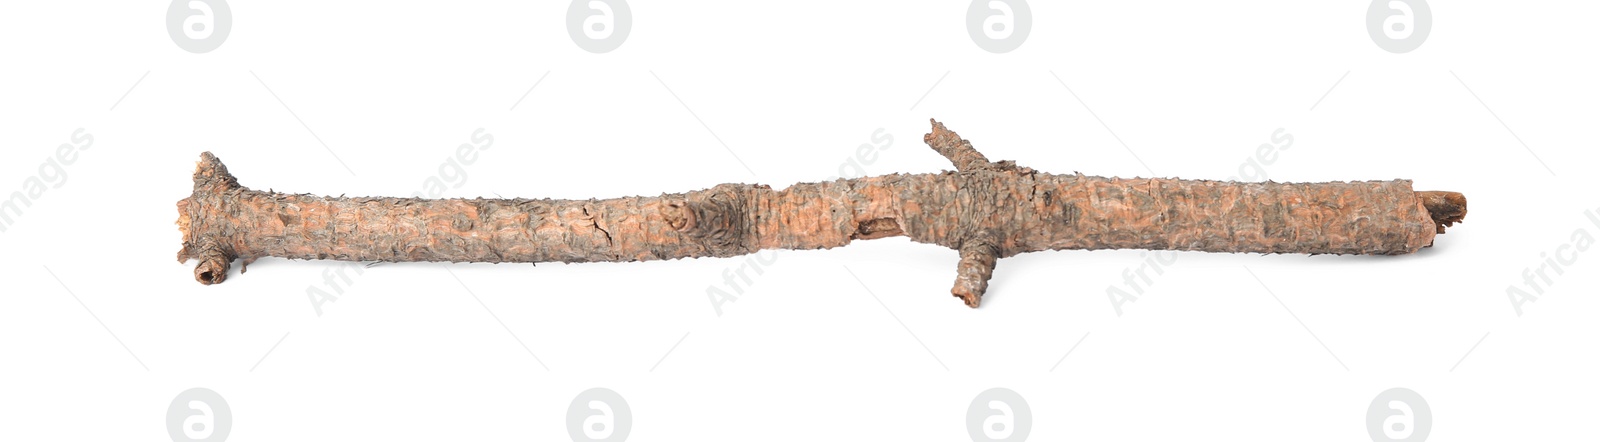 Photo of One dry tree twig isolated on white